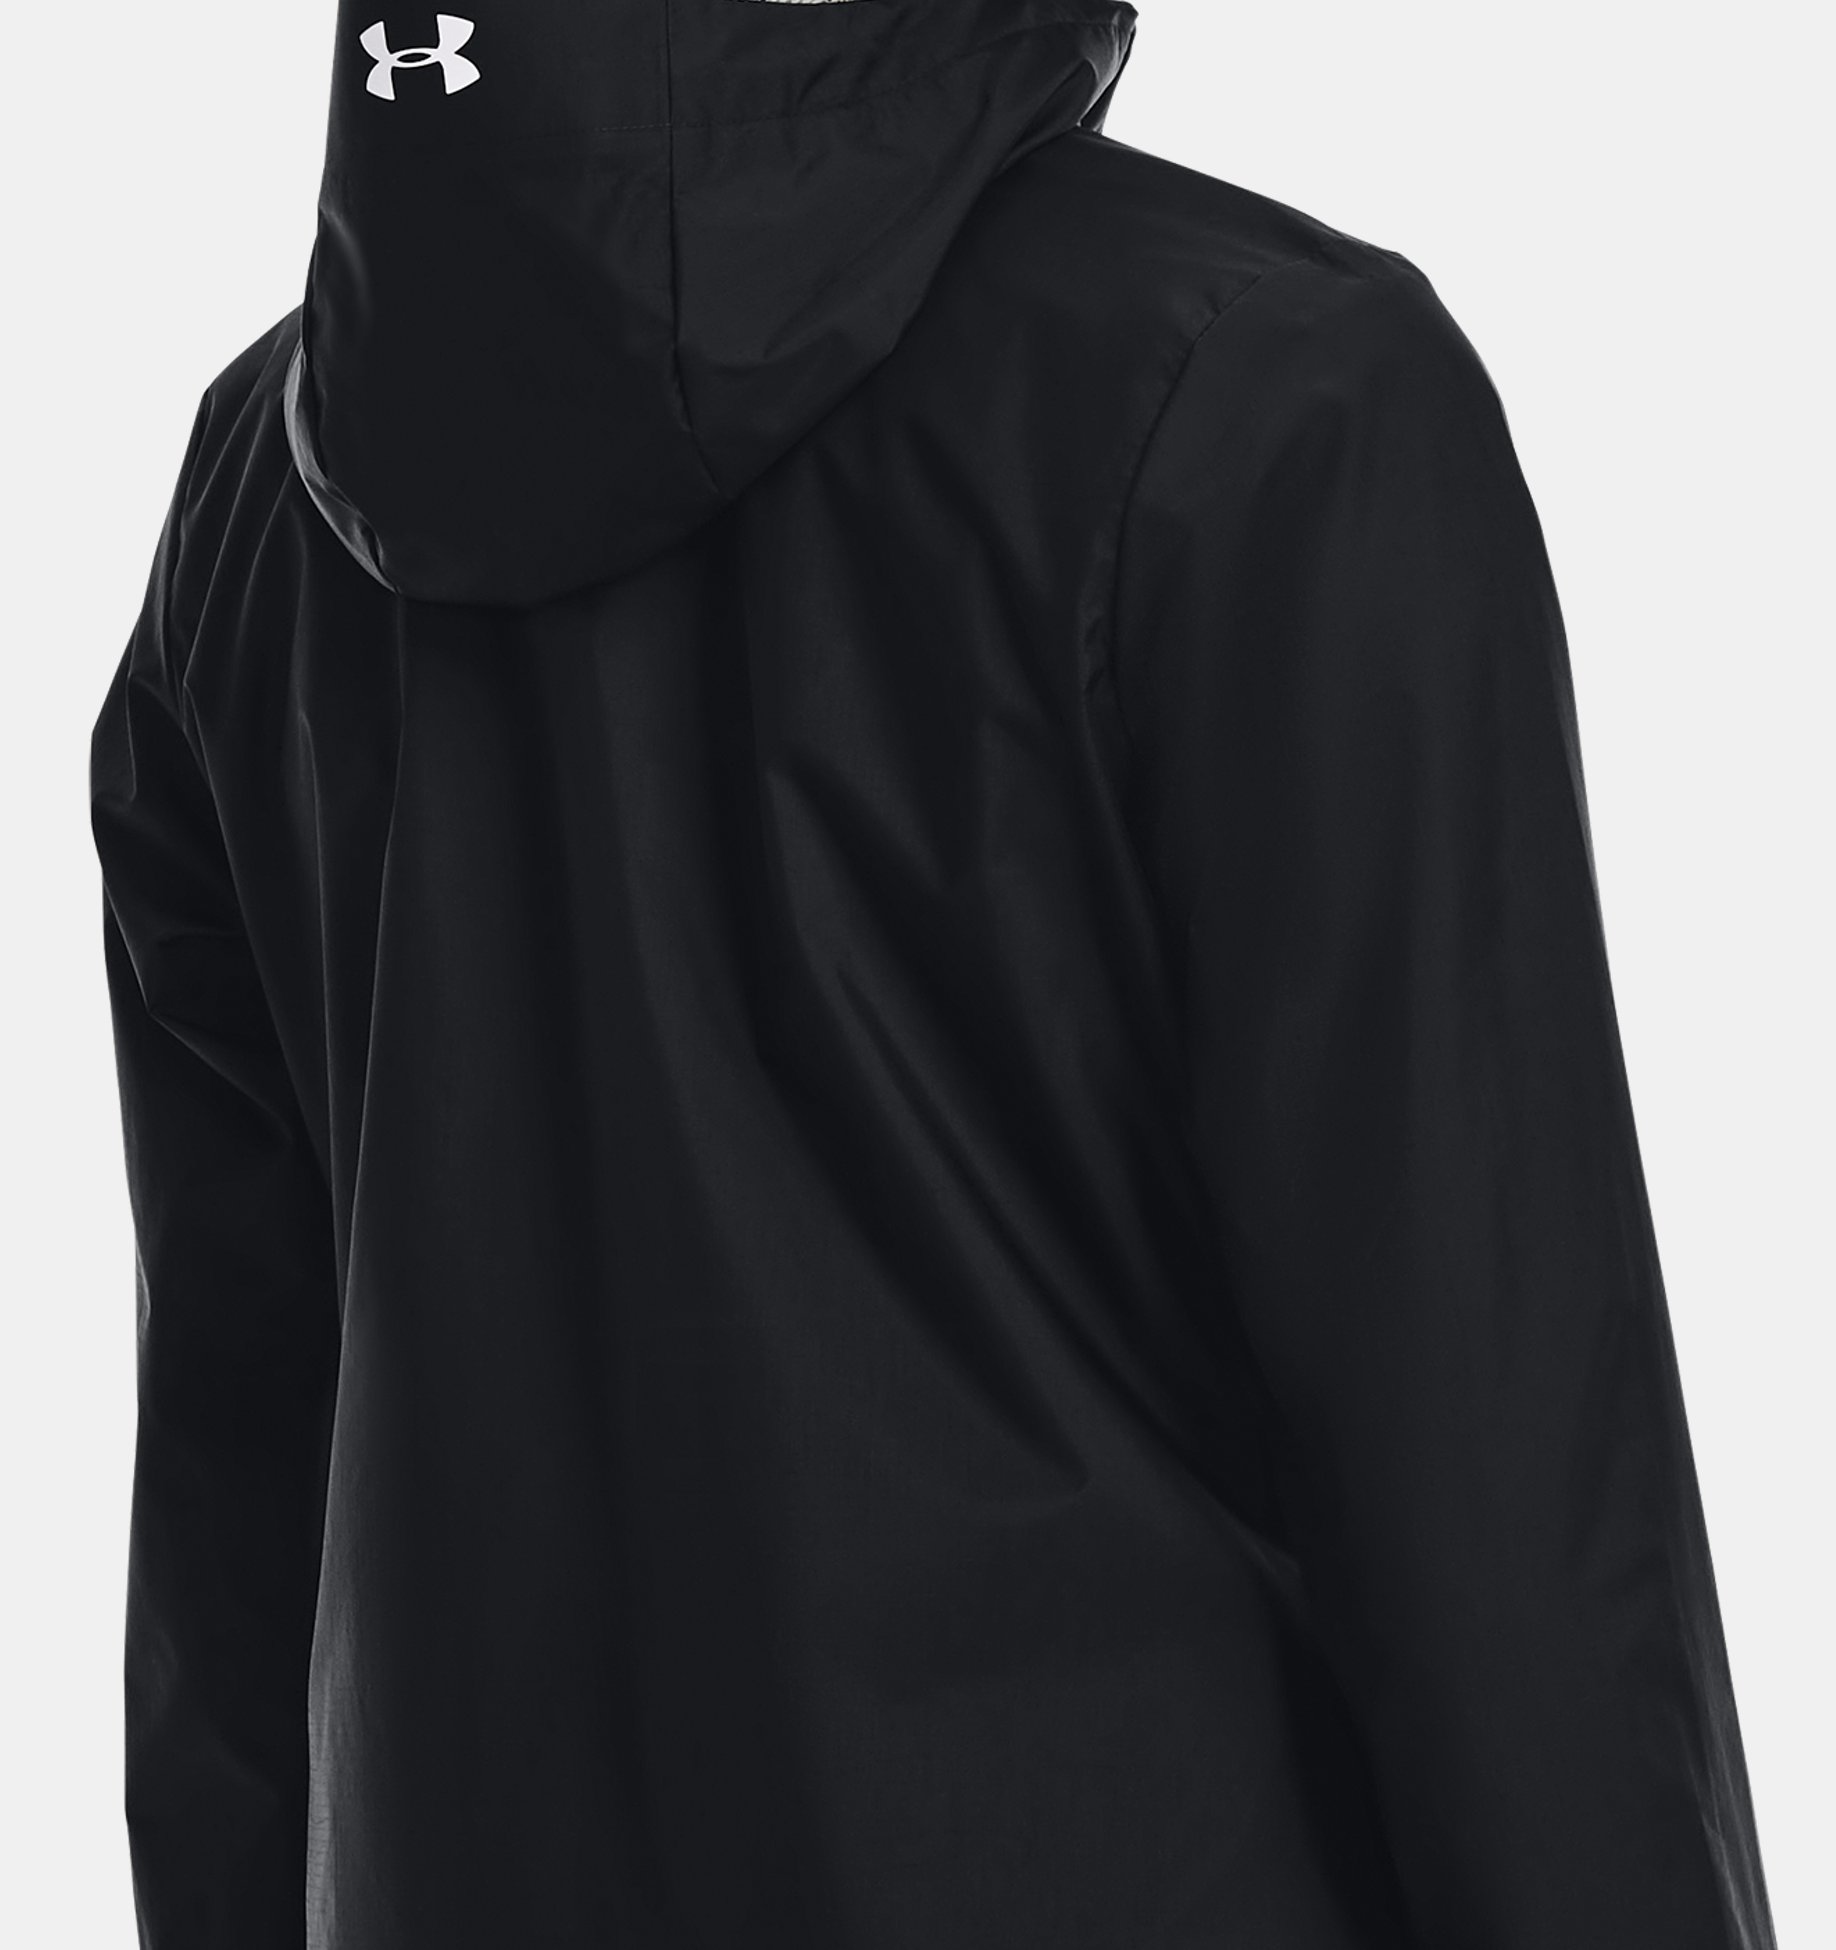 Under Armour, Forefront Rain Jacket Womens, Acad/Branc